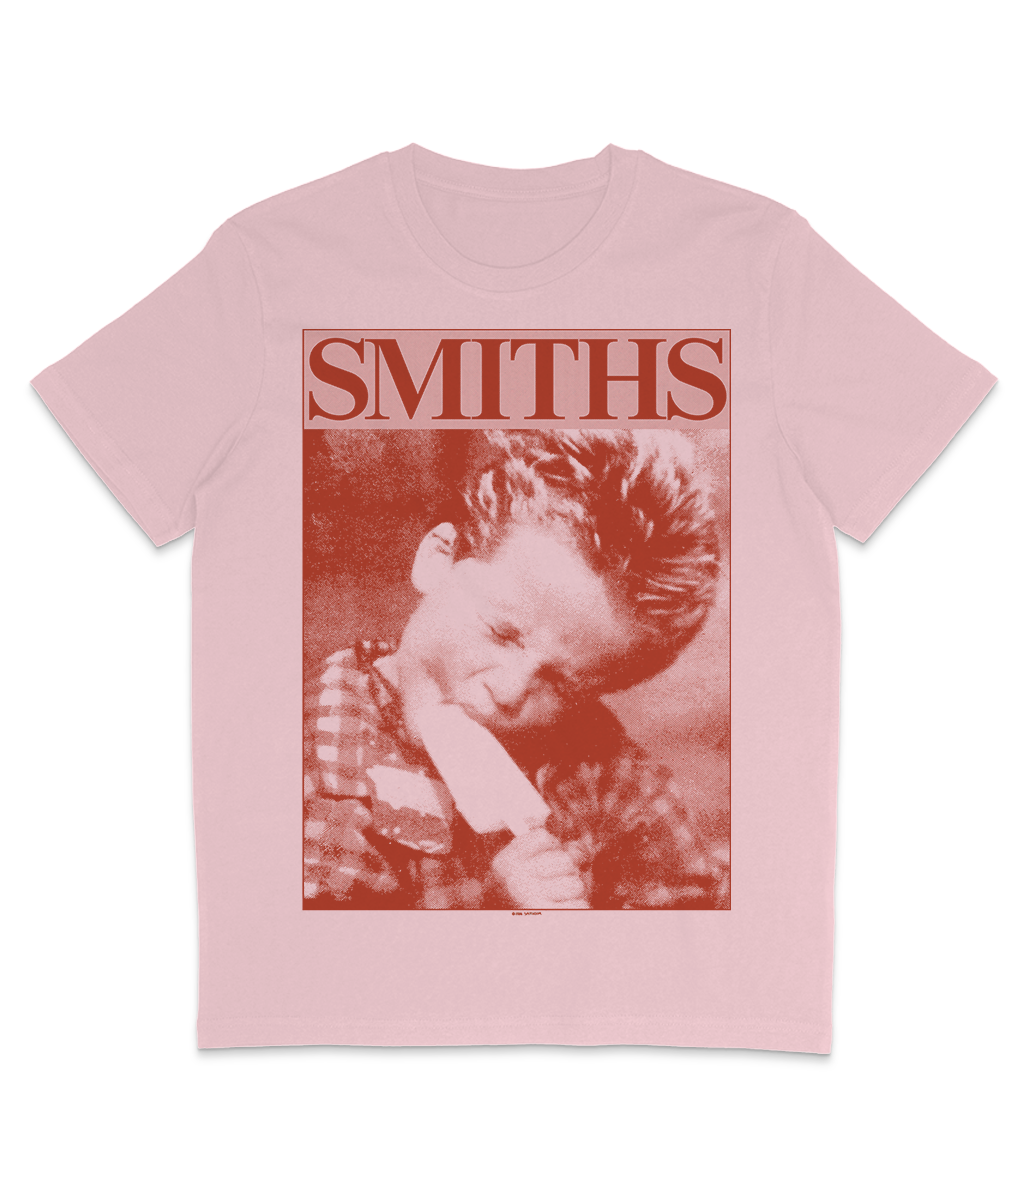 THE SMITHS - 'Boy With Lolly' - Smithdom - 1986